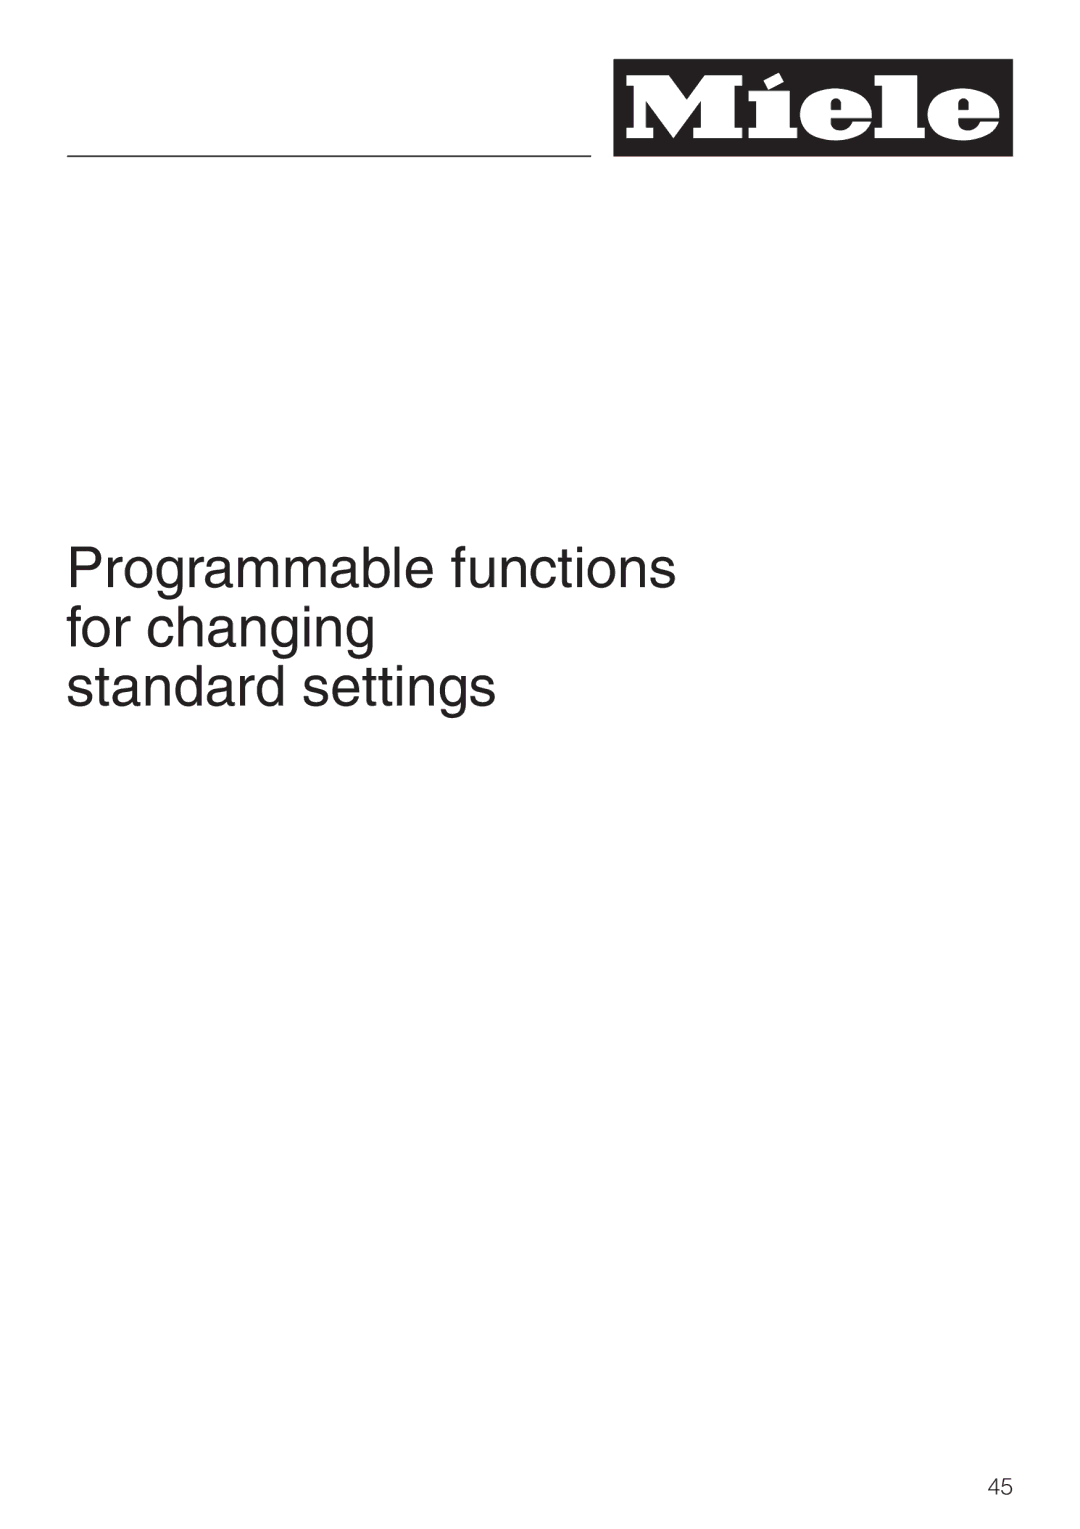 Miele T 4422 C operating instructions Programmable functions for changing standard settings 